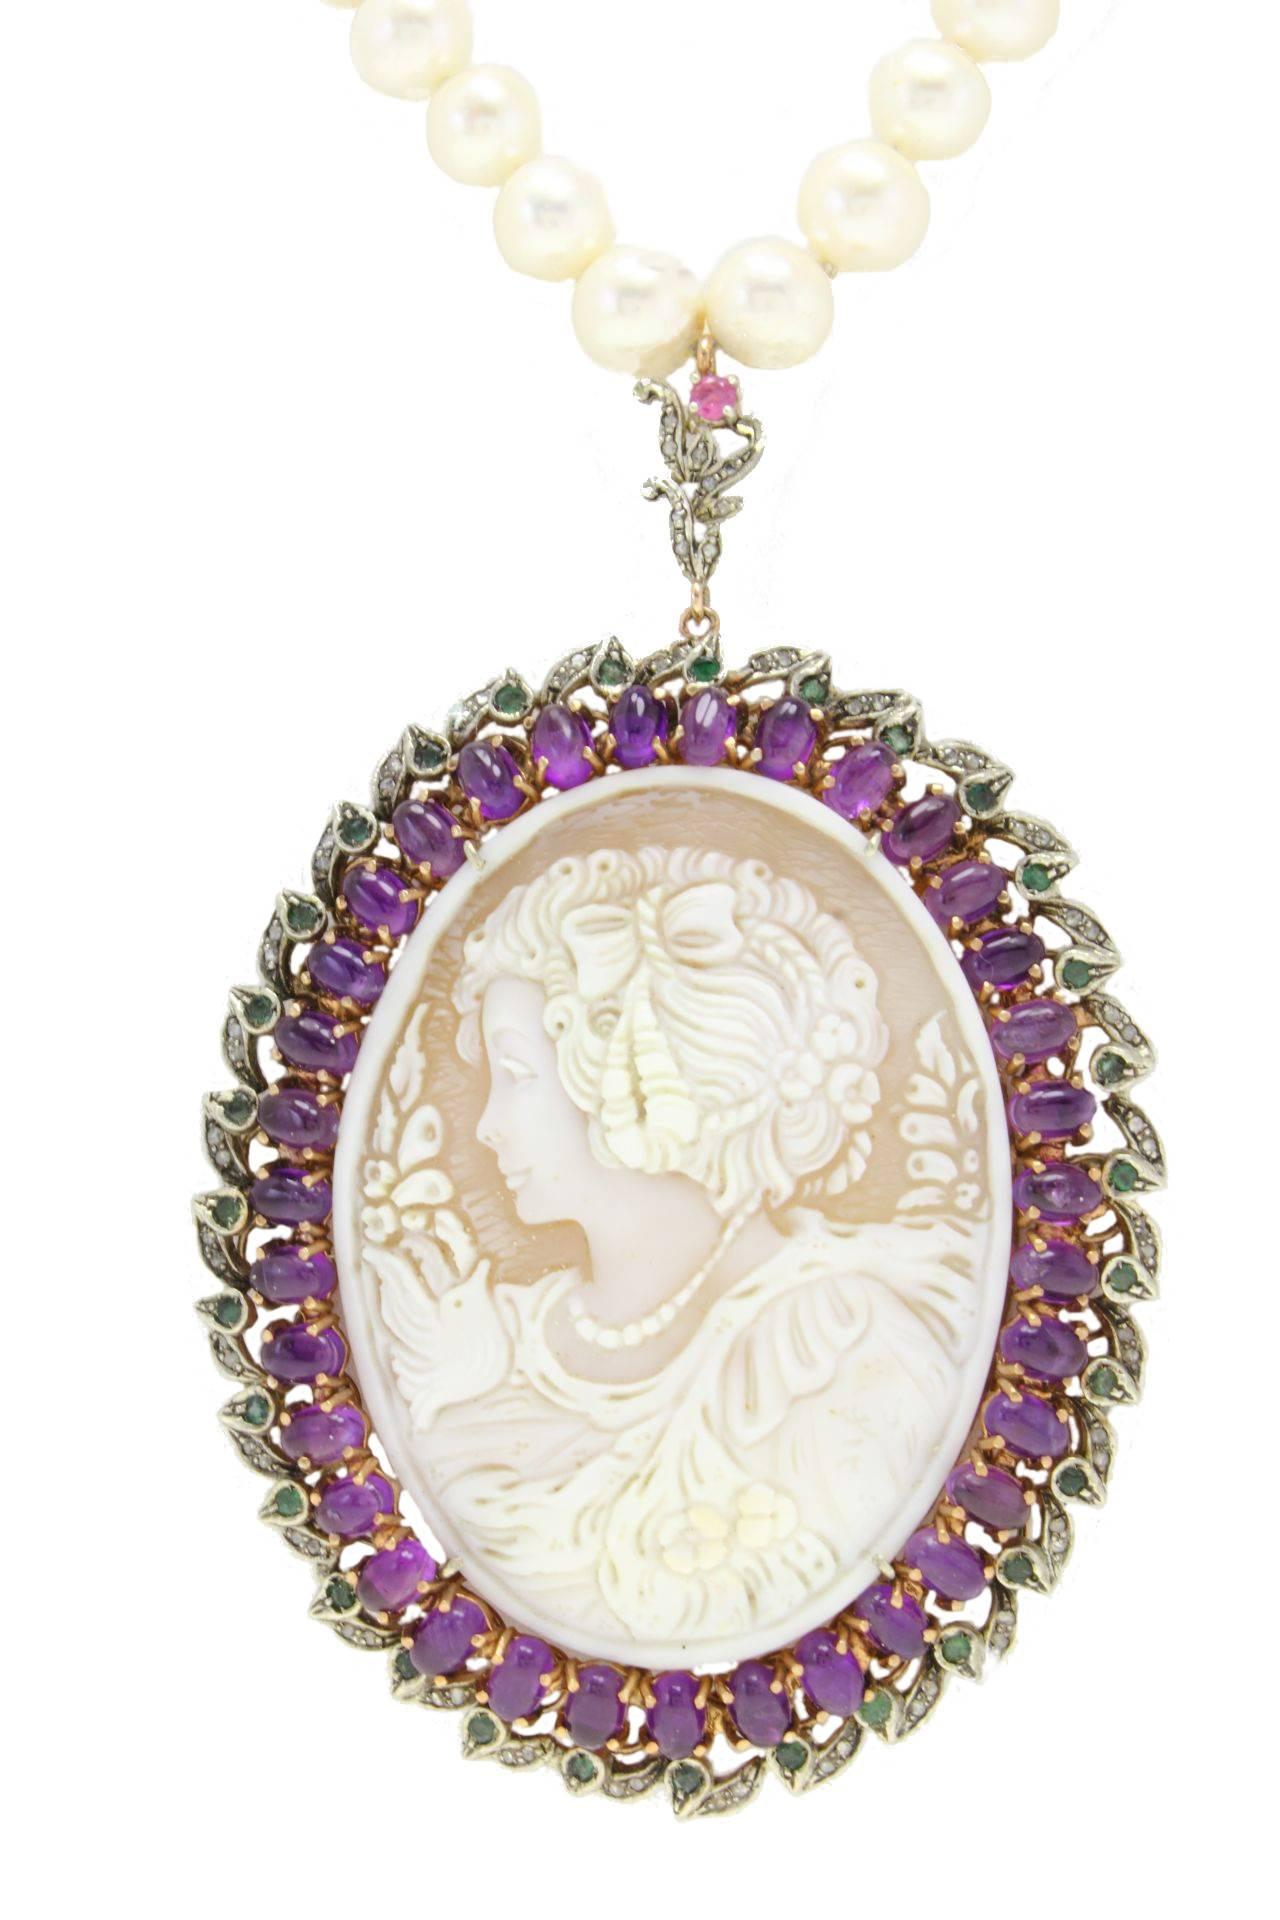  Mounted on 9Kt gold and silver, this charming cameo is surrounded of a frame of amethyst (18.51Kt), emeralds and ruby(1.79Kt), and diamonds on the edges(0.64Kt).And it is a pendant of a single strand of pearls with a diameter 8-9mm(47.6gr). tot